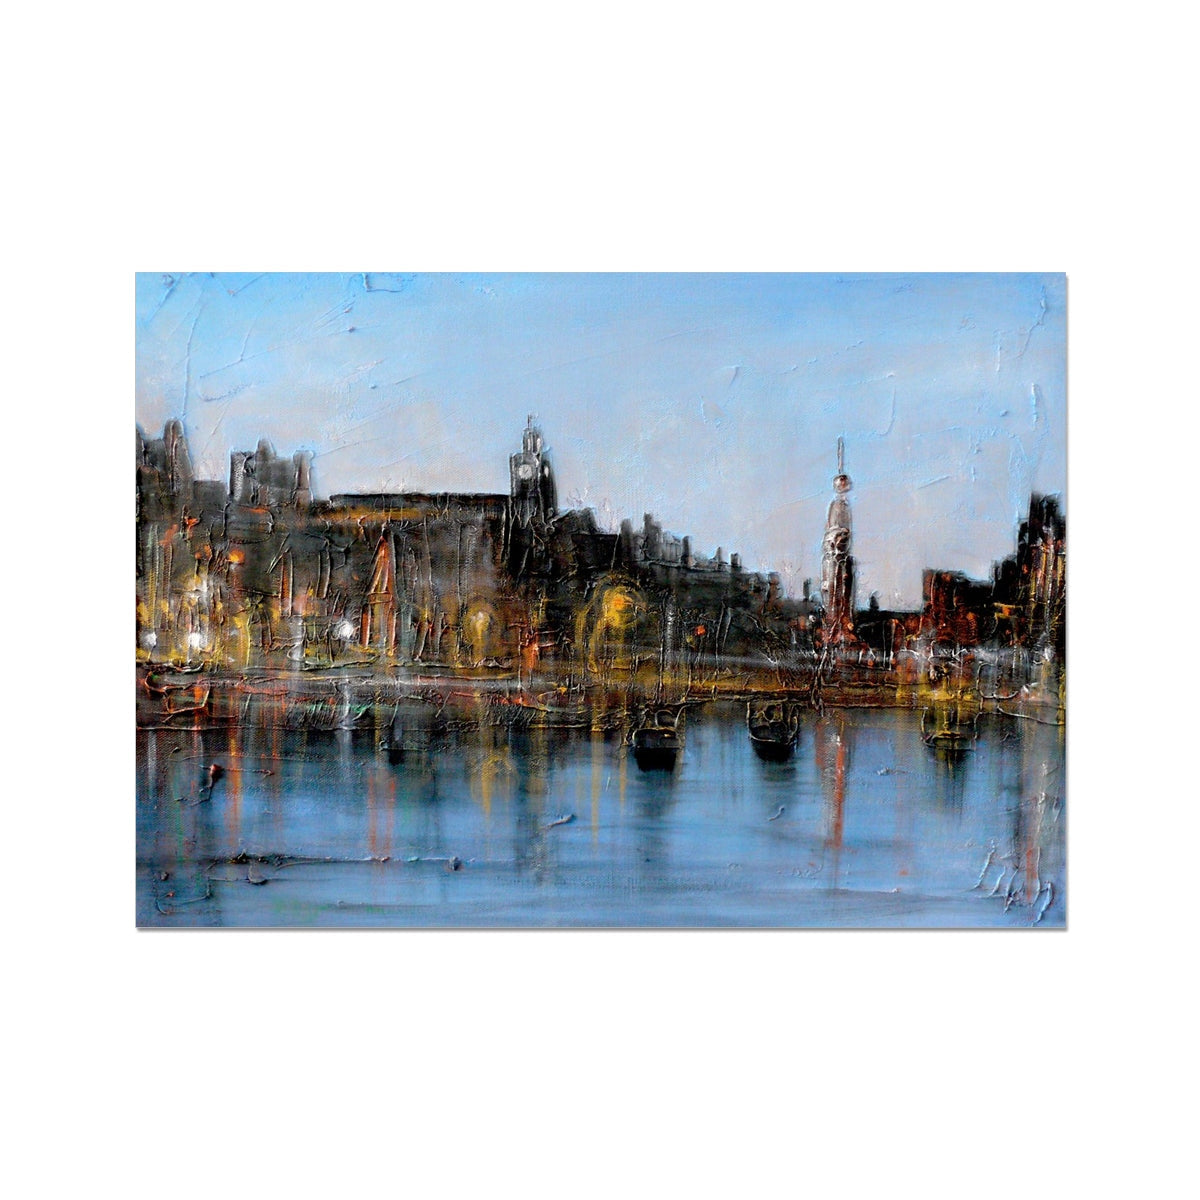 Winter In Amsterdam Painting | Fine Art Prints From Scotland-Unframed Prints-World Art Gallery-A2 Landscape-Paintings, Prints, Homeware, Art Gifts From Scotland By Scottish Artist Kevin Hunter